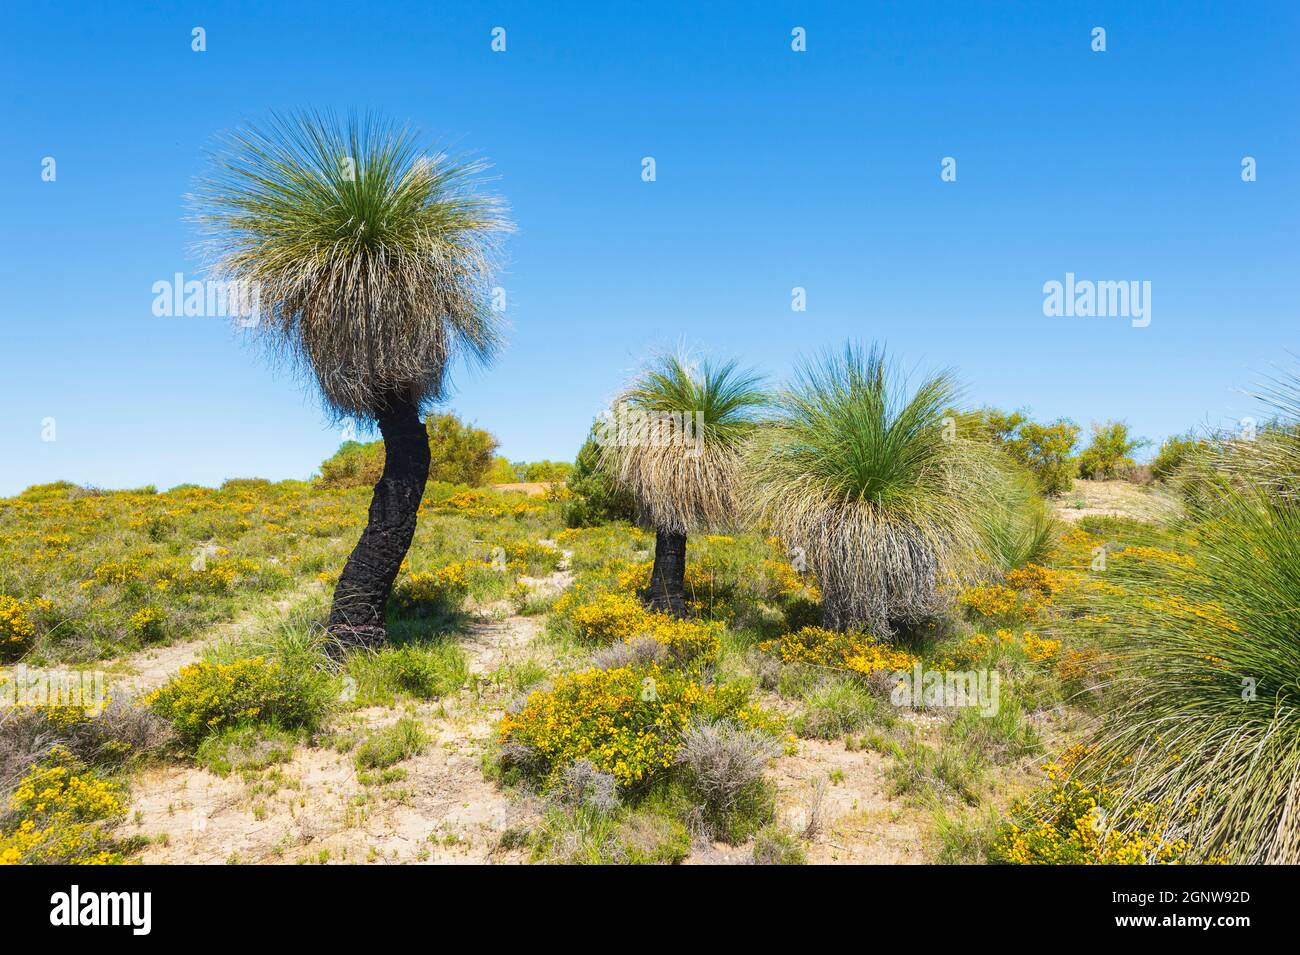 Grass Trees (Xanthorrhoea preissii) growing in the Wanagarren Nature Reserve among wildflowers at springtime, near Cervantes, Gascoigne Region, Wester Stock Photo